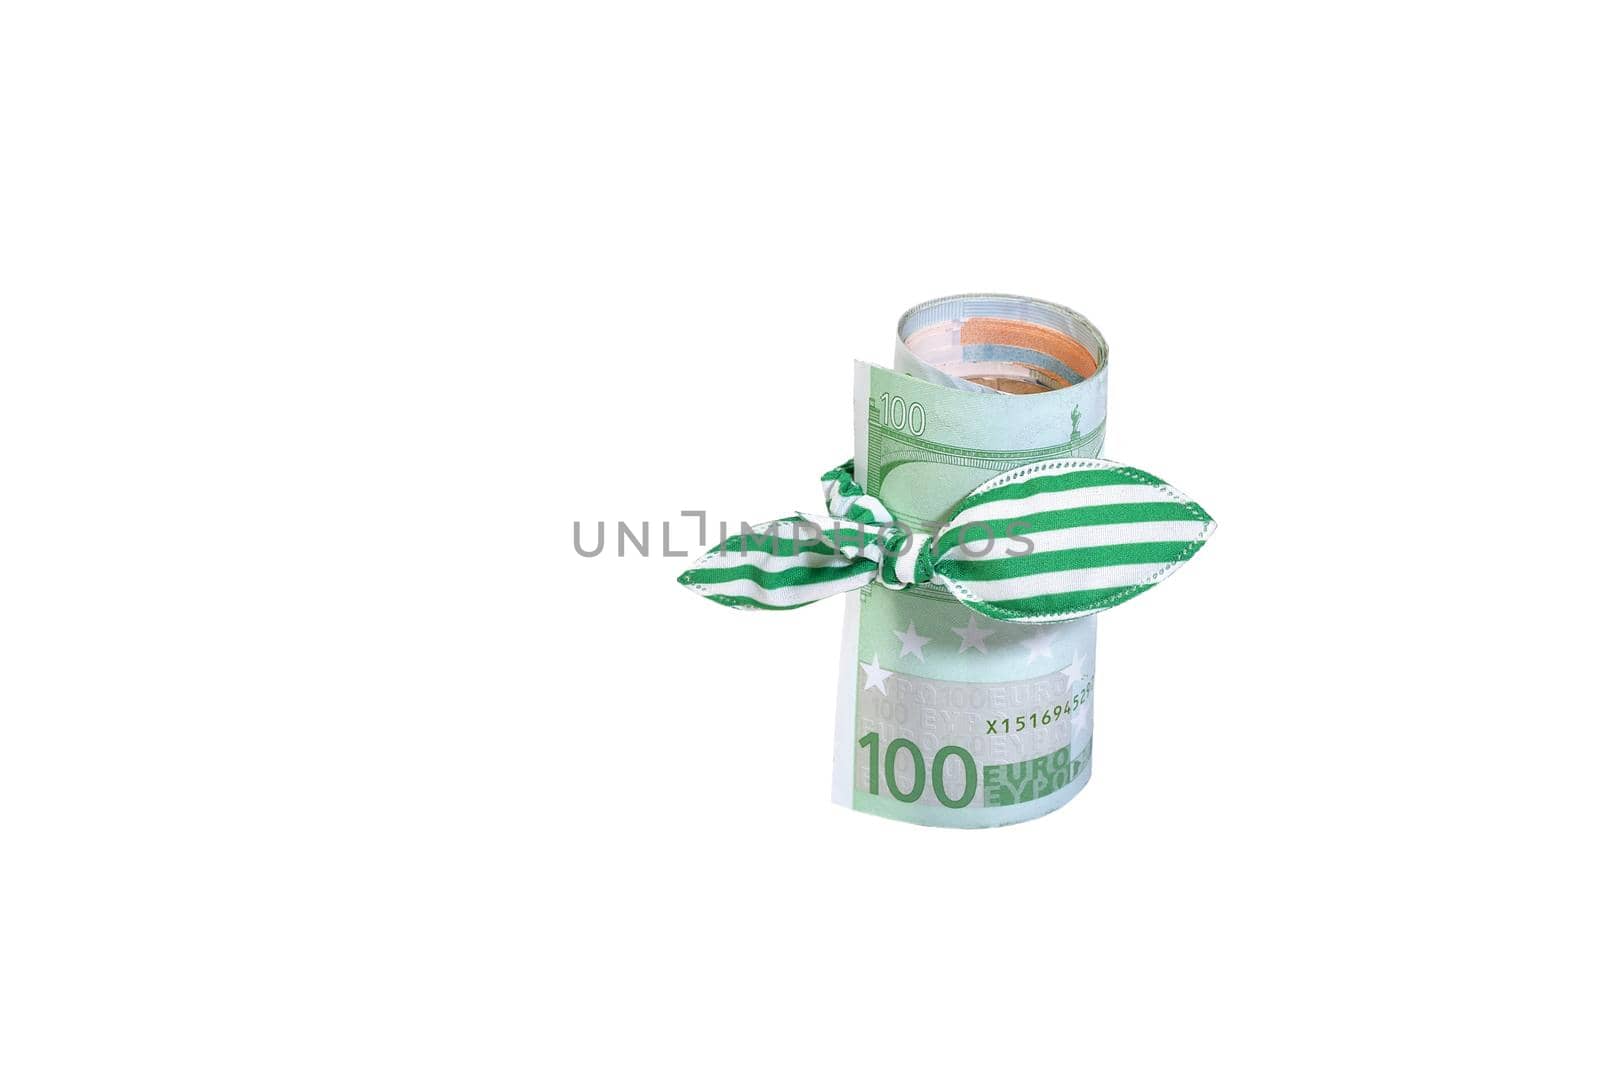 Hundred euros banknote curtailed by a tubule with green elastic band with a bow isolated on white